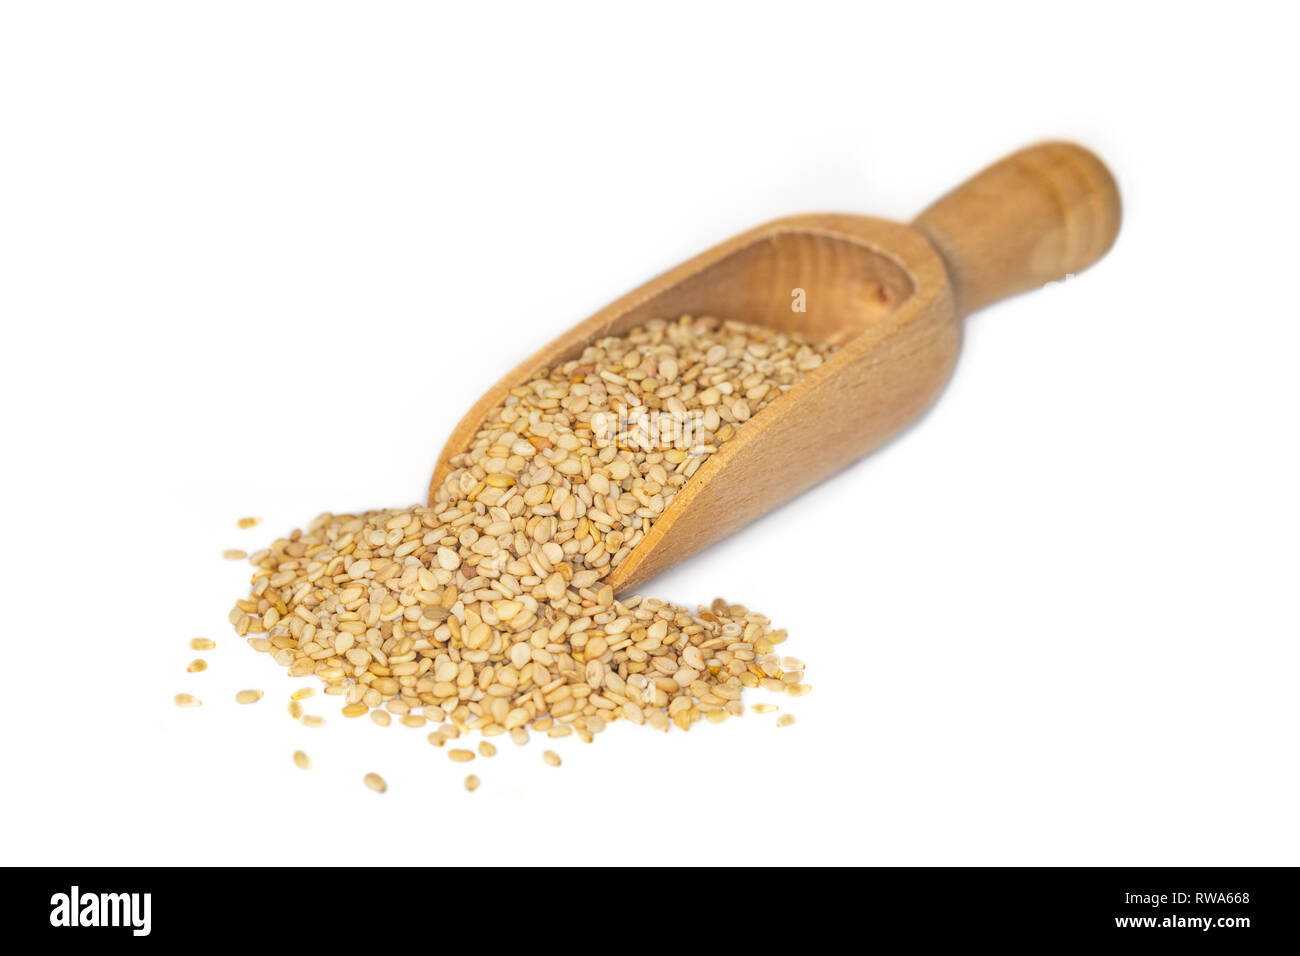 Closeup of sesame seeds, a plant based source of calcium and iron, presented on a small wooden scoop Stock Photo